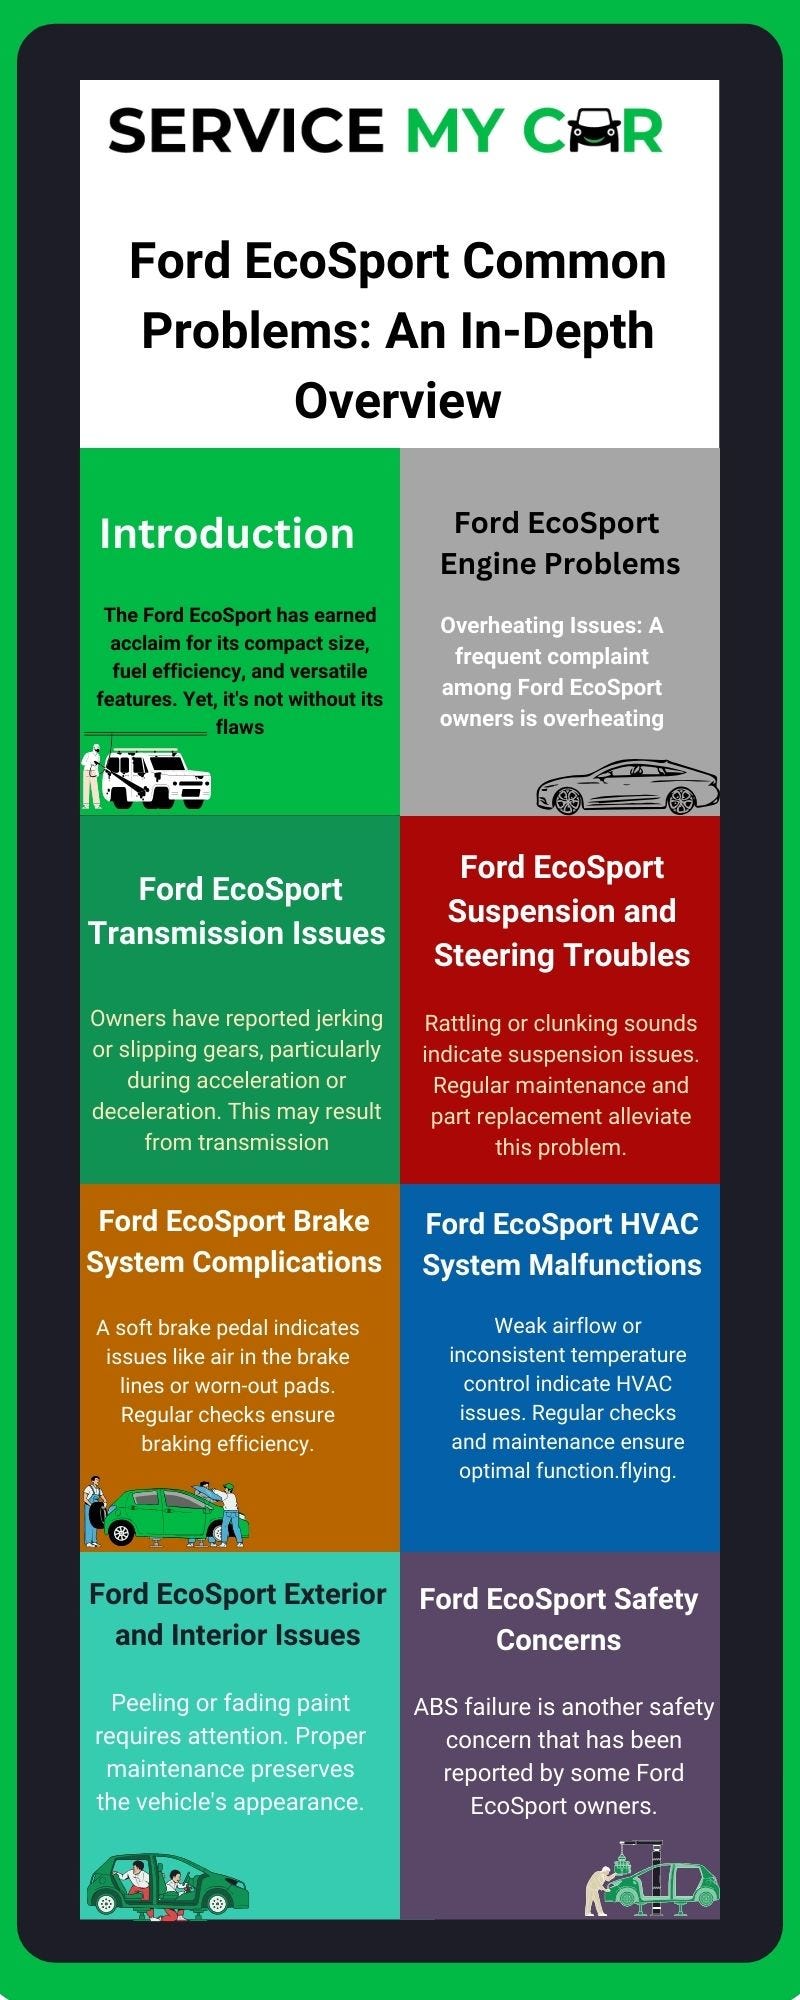 Ford EcoSport Common Problems: An In-Depth Overview